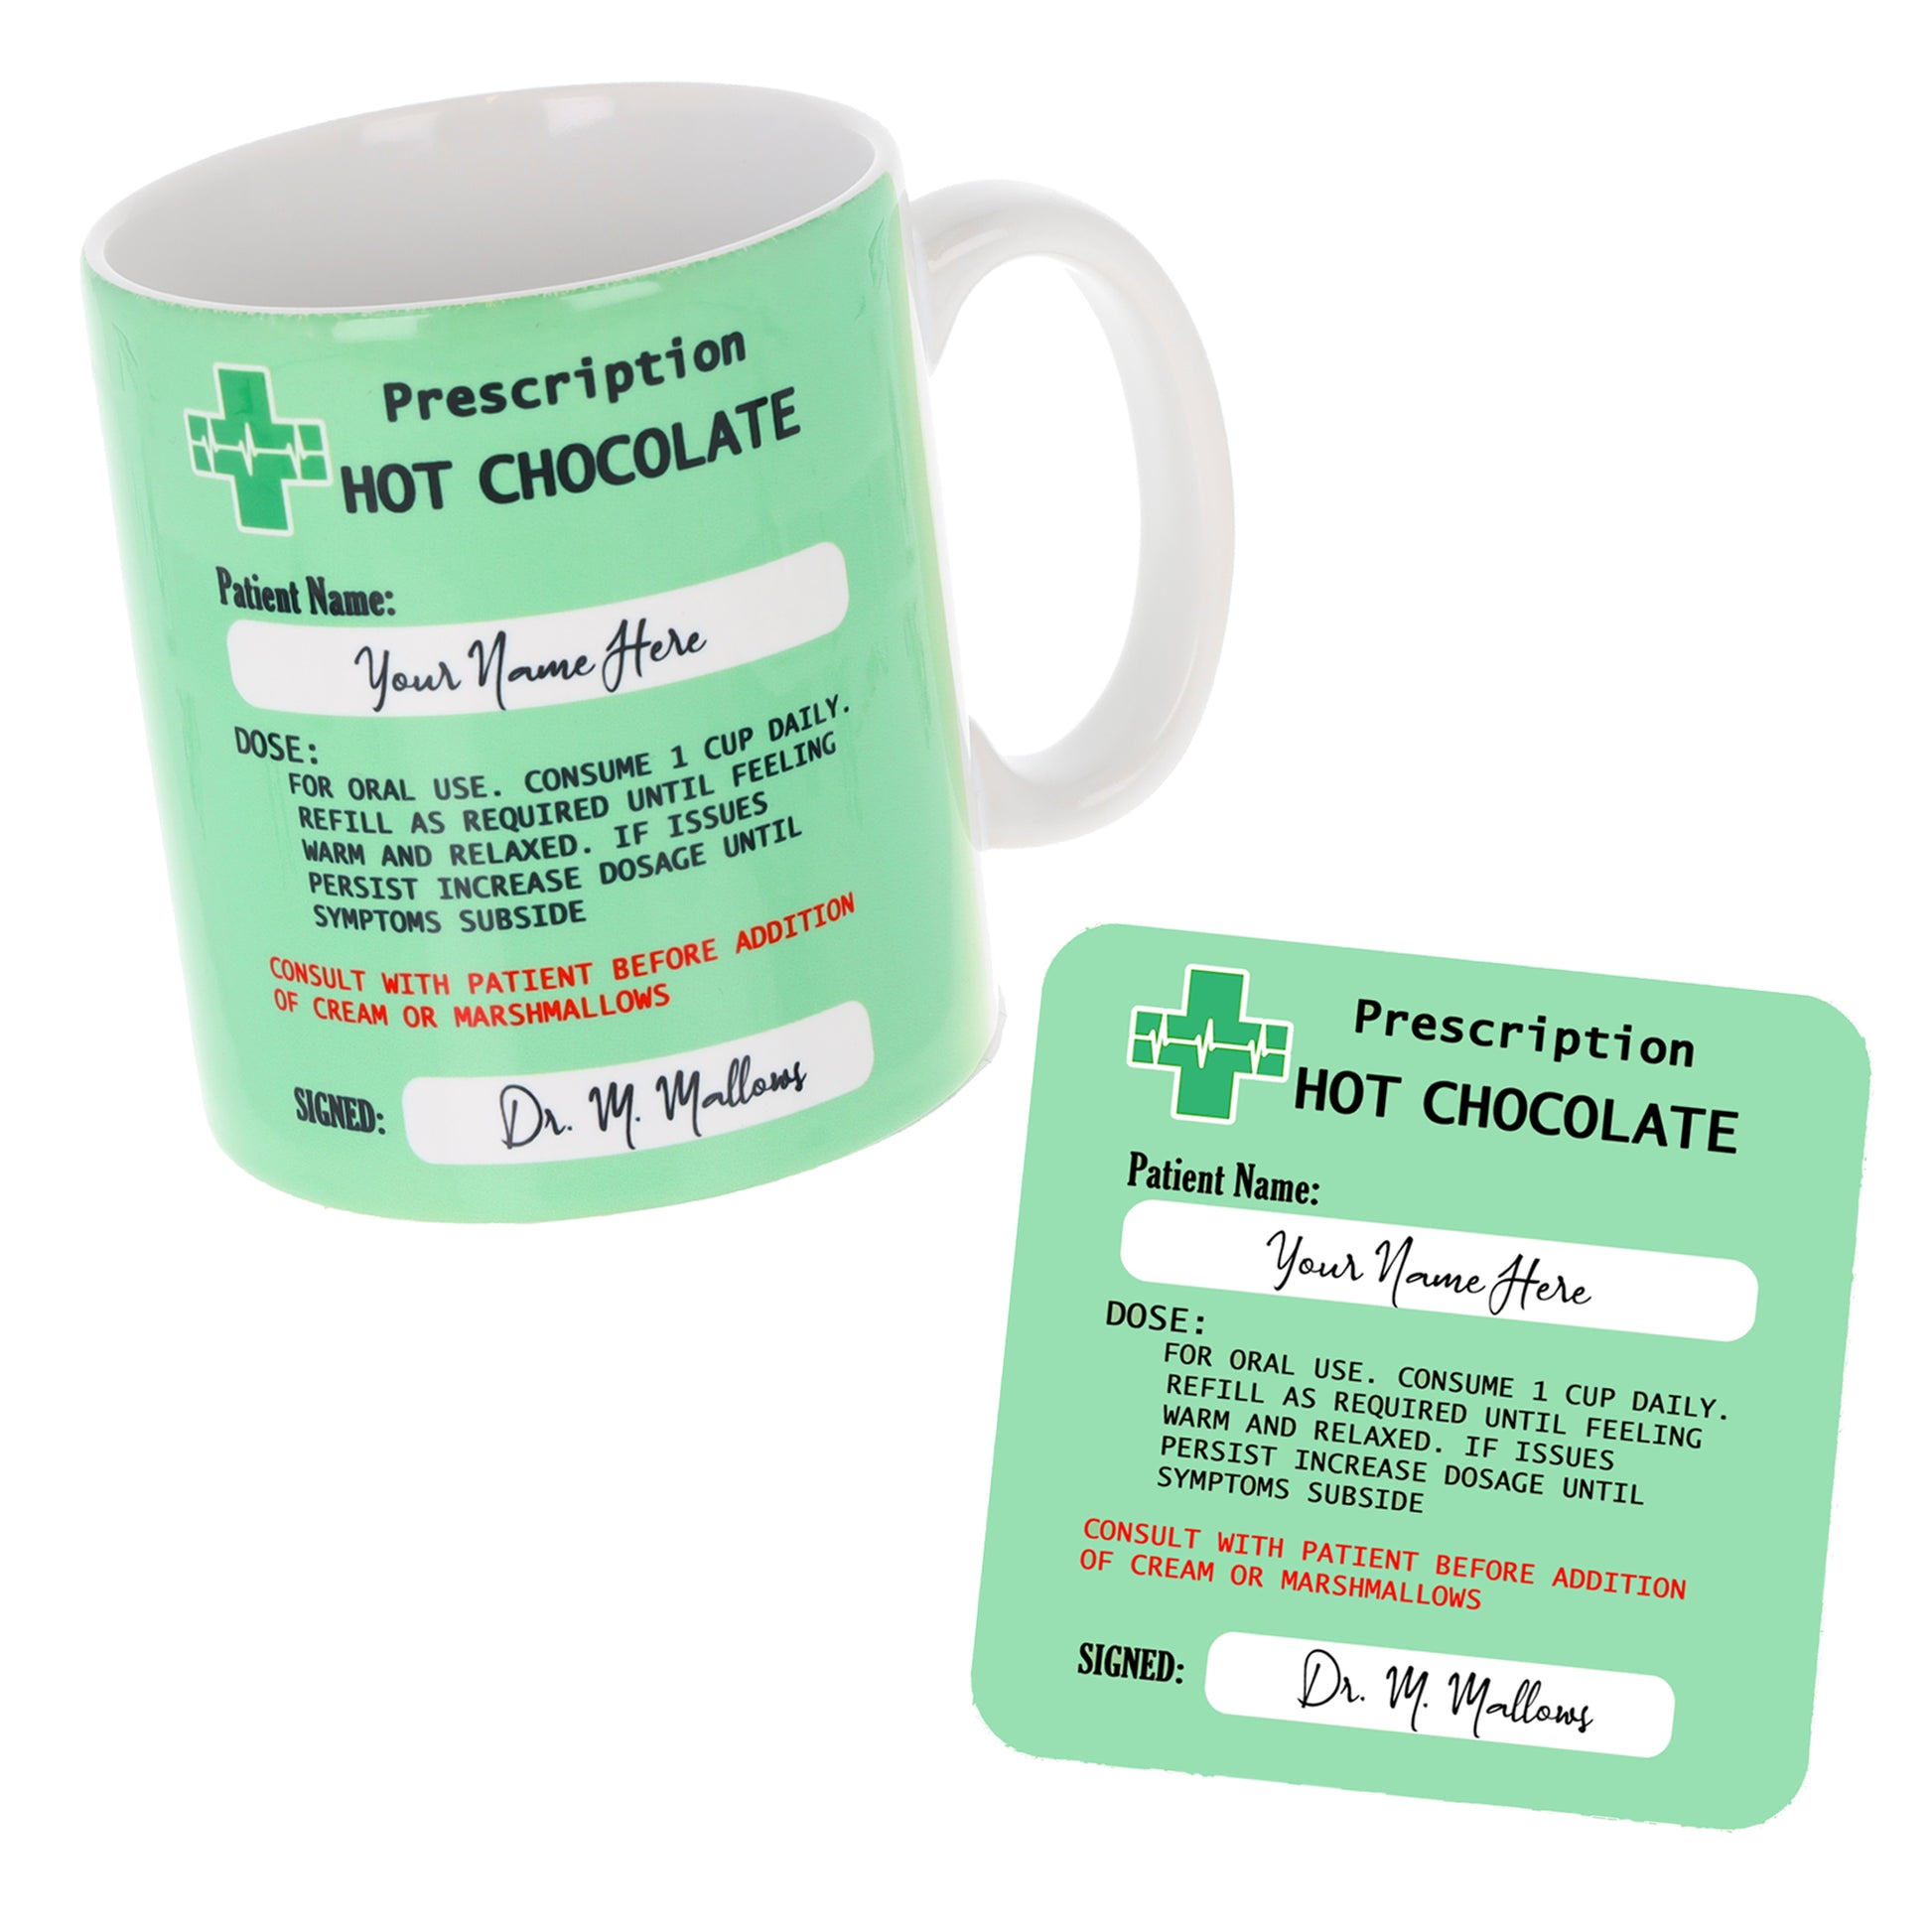 Personalised Prescription Hot Chocolate Mug and Coaster Filled Gift Set  - Always Looking Good -   